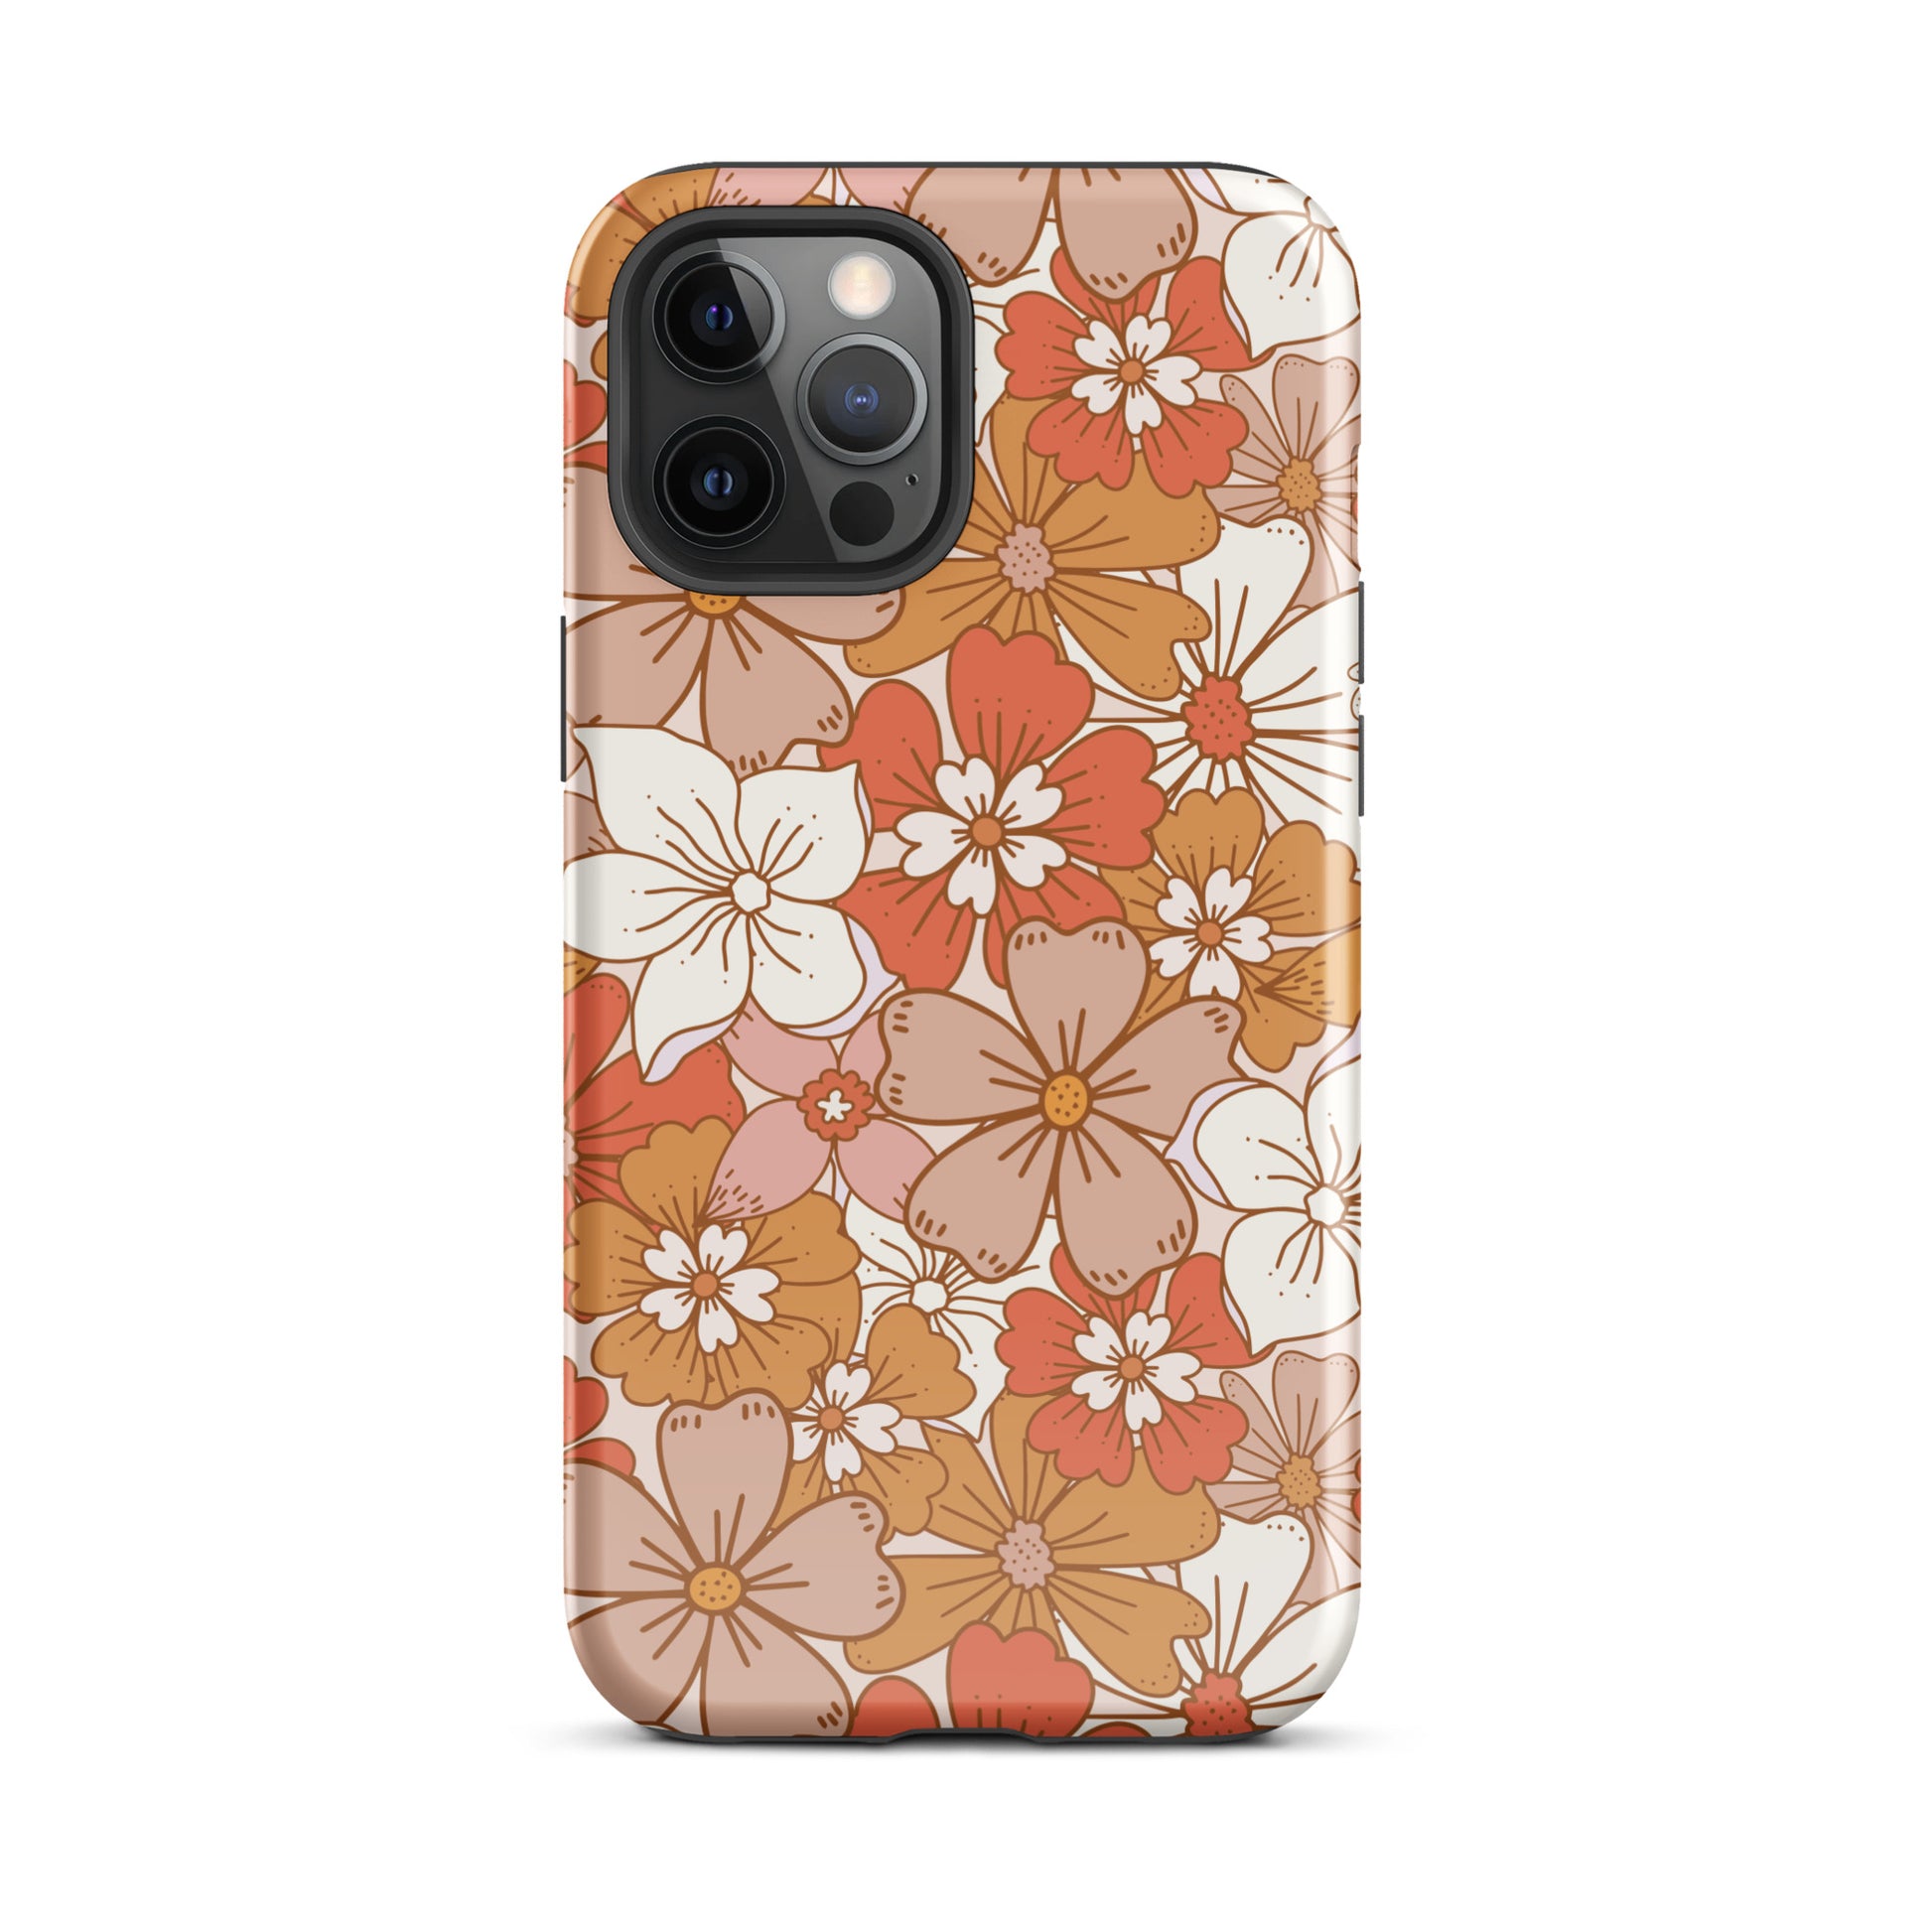 Vintage Garden iPhone Case iPhone 12 Pro Max Glossy